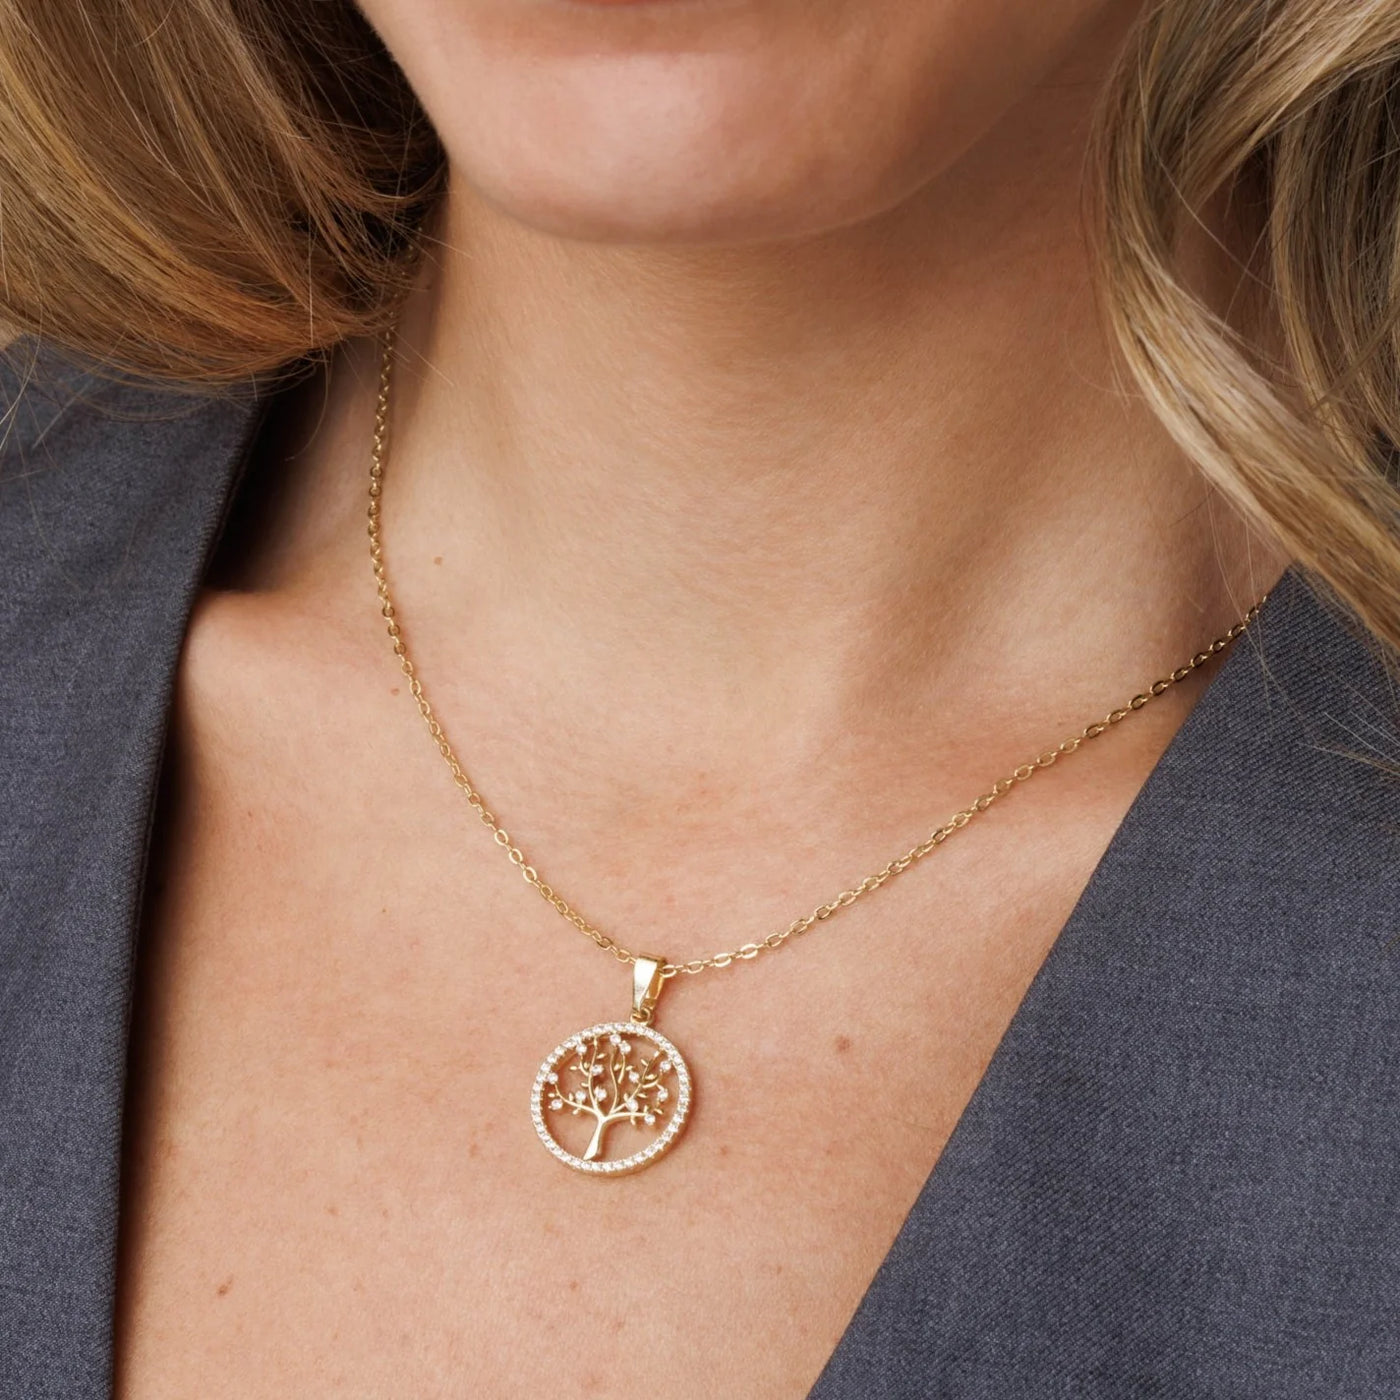 Tree of Life Necklace in Clean and Minimalist Design - Annie